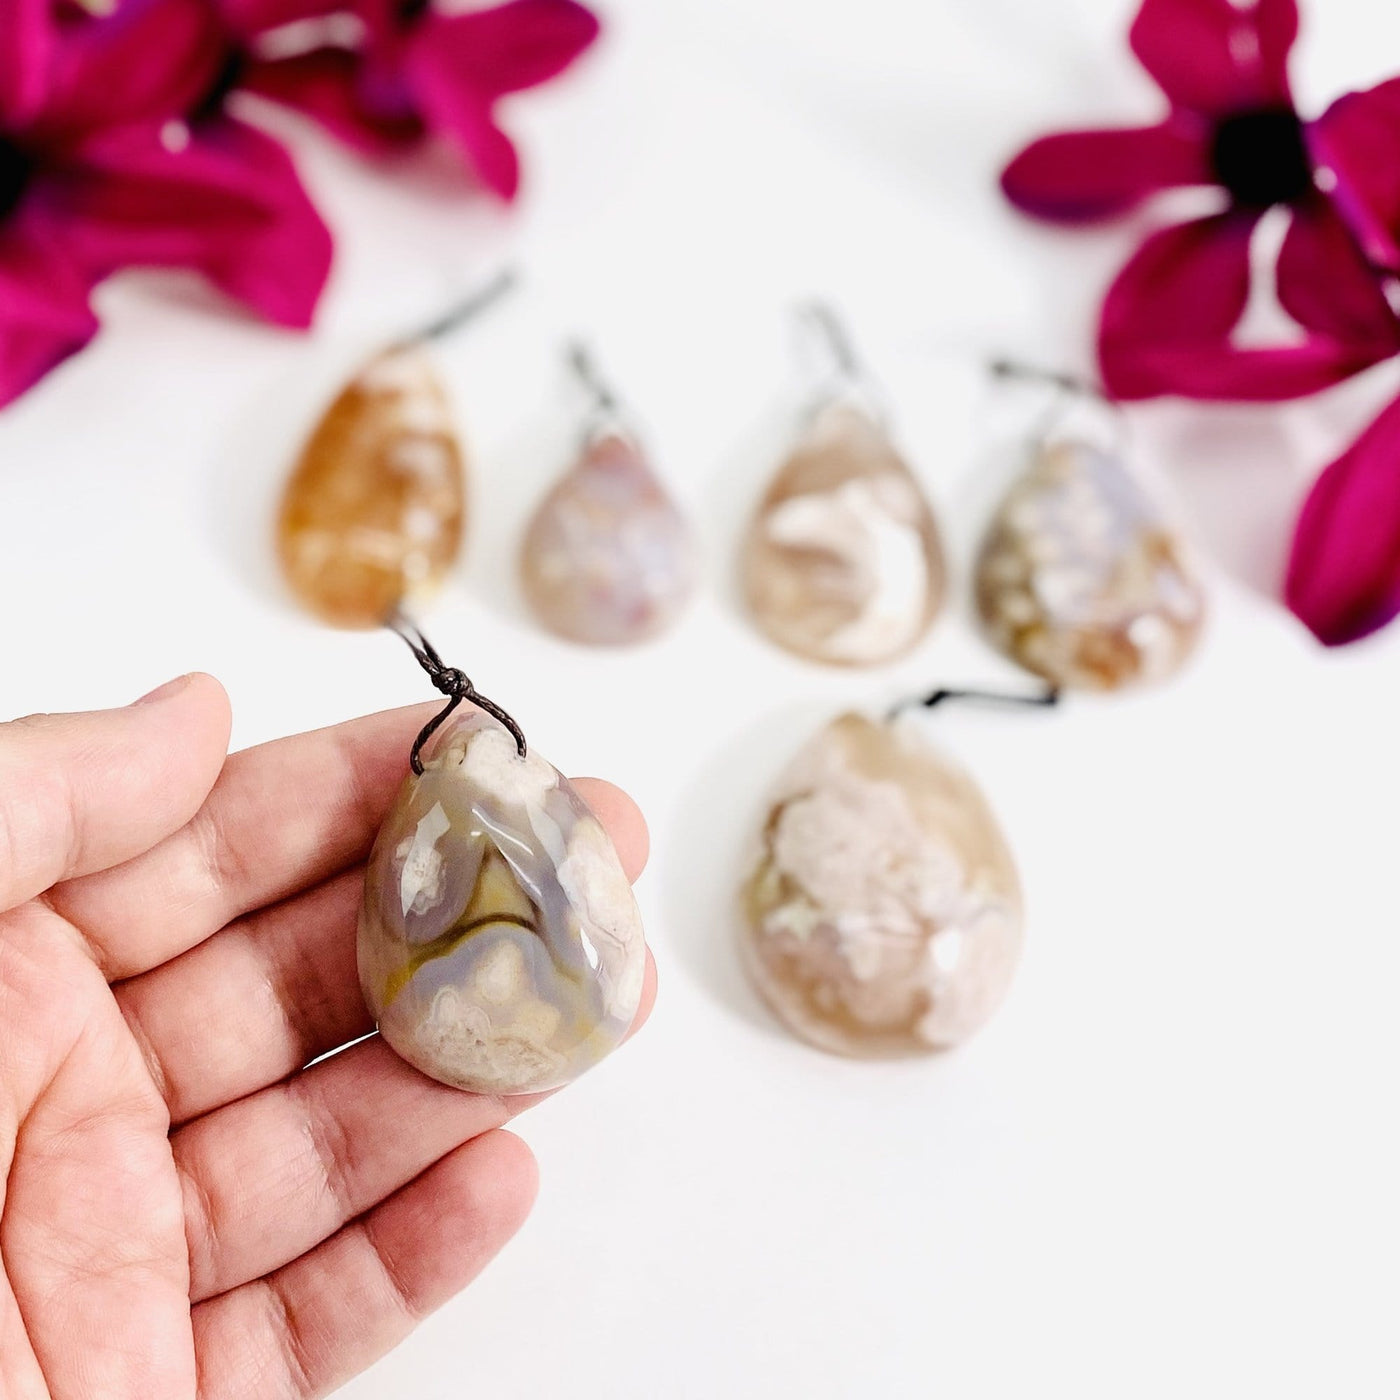 Flower Agate Tumbled Pendants gripped in fingers